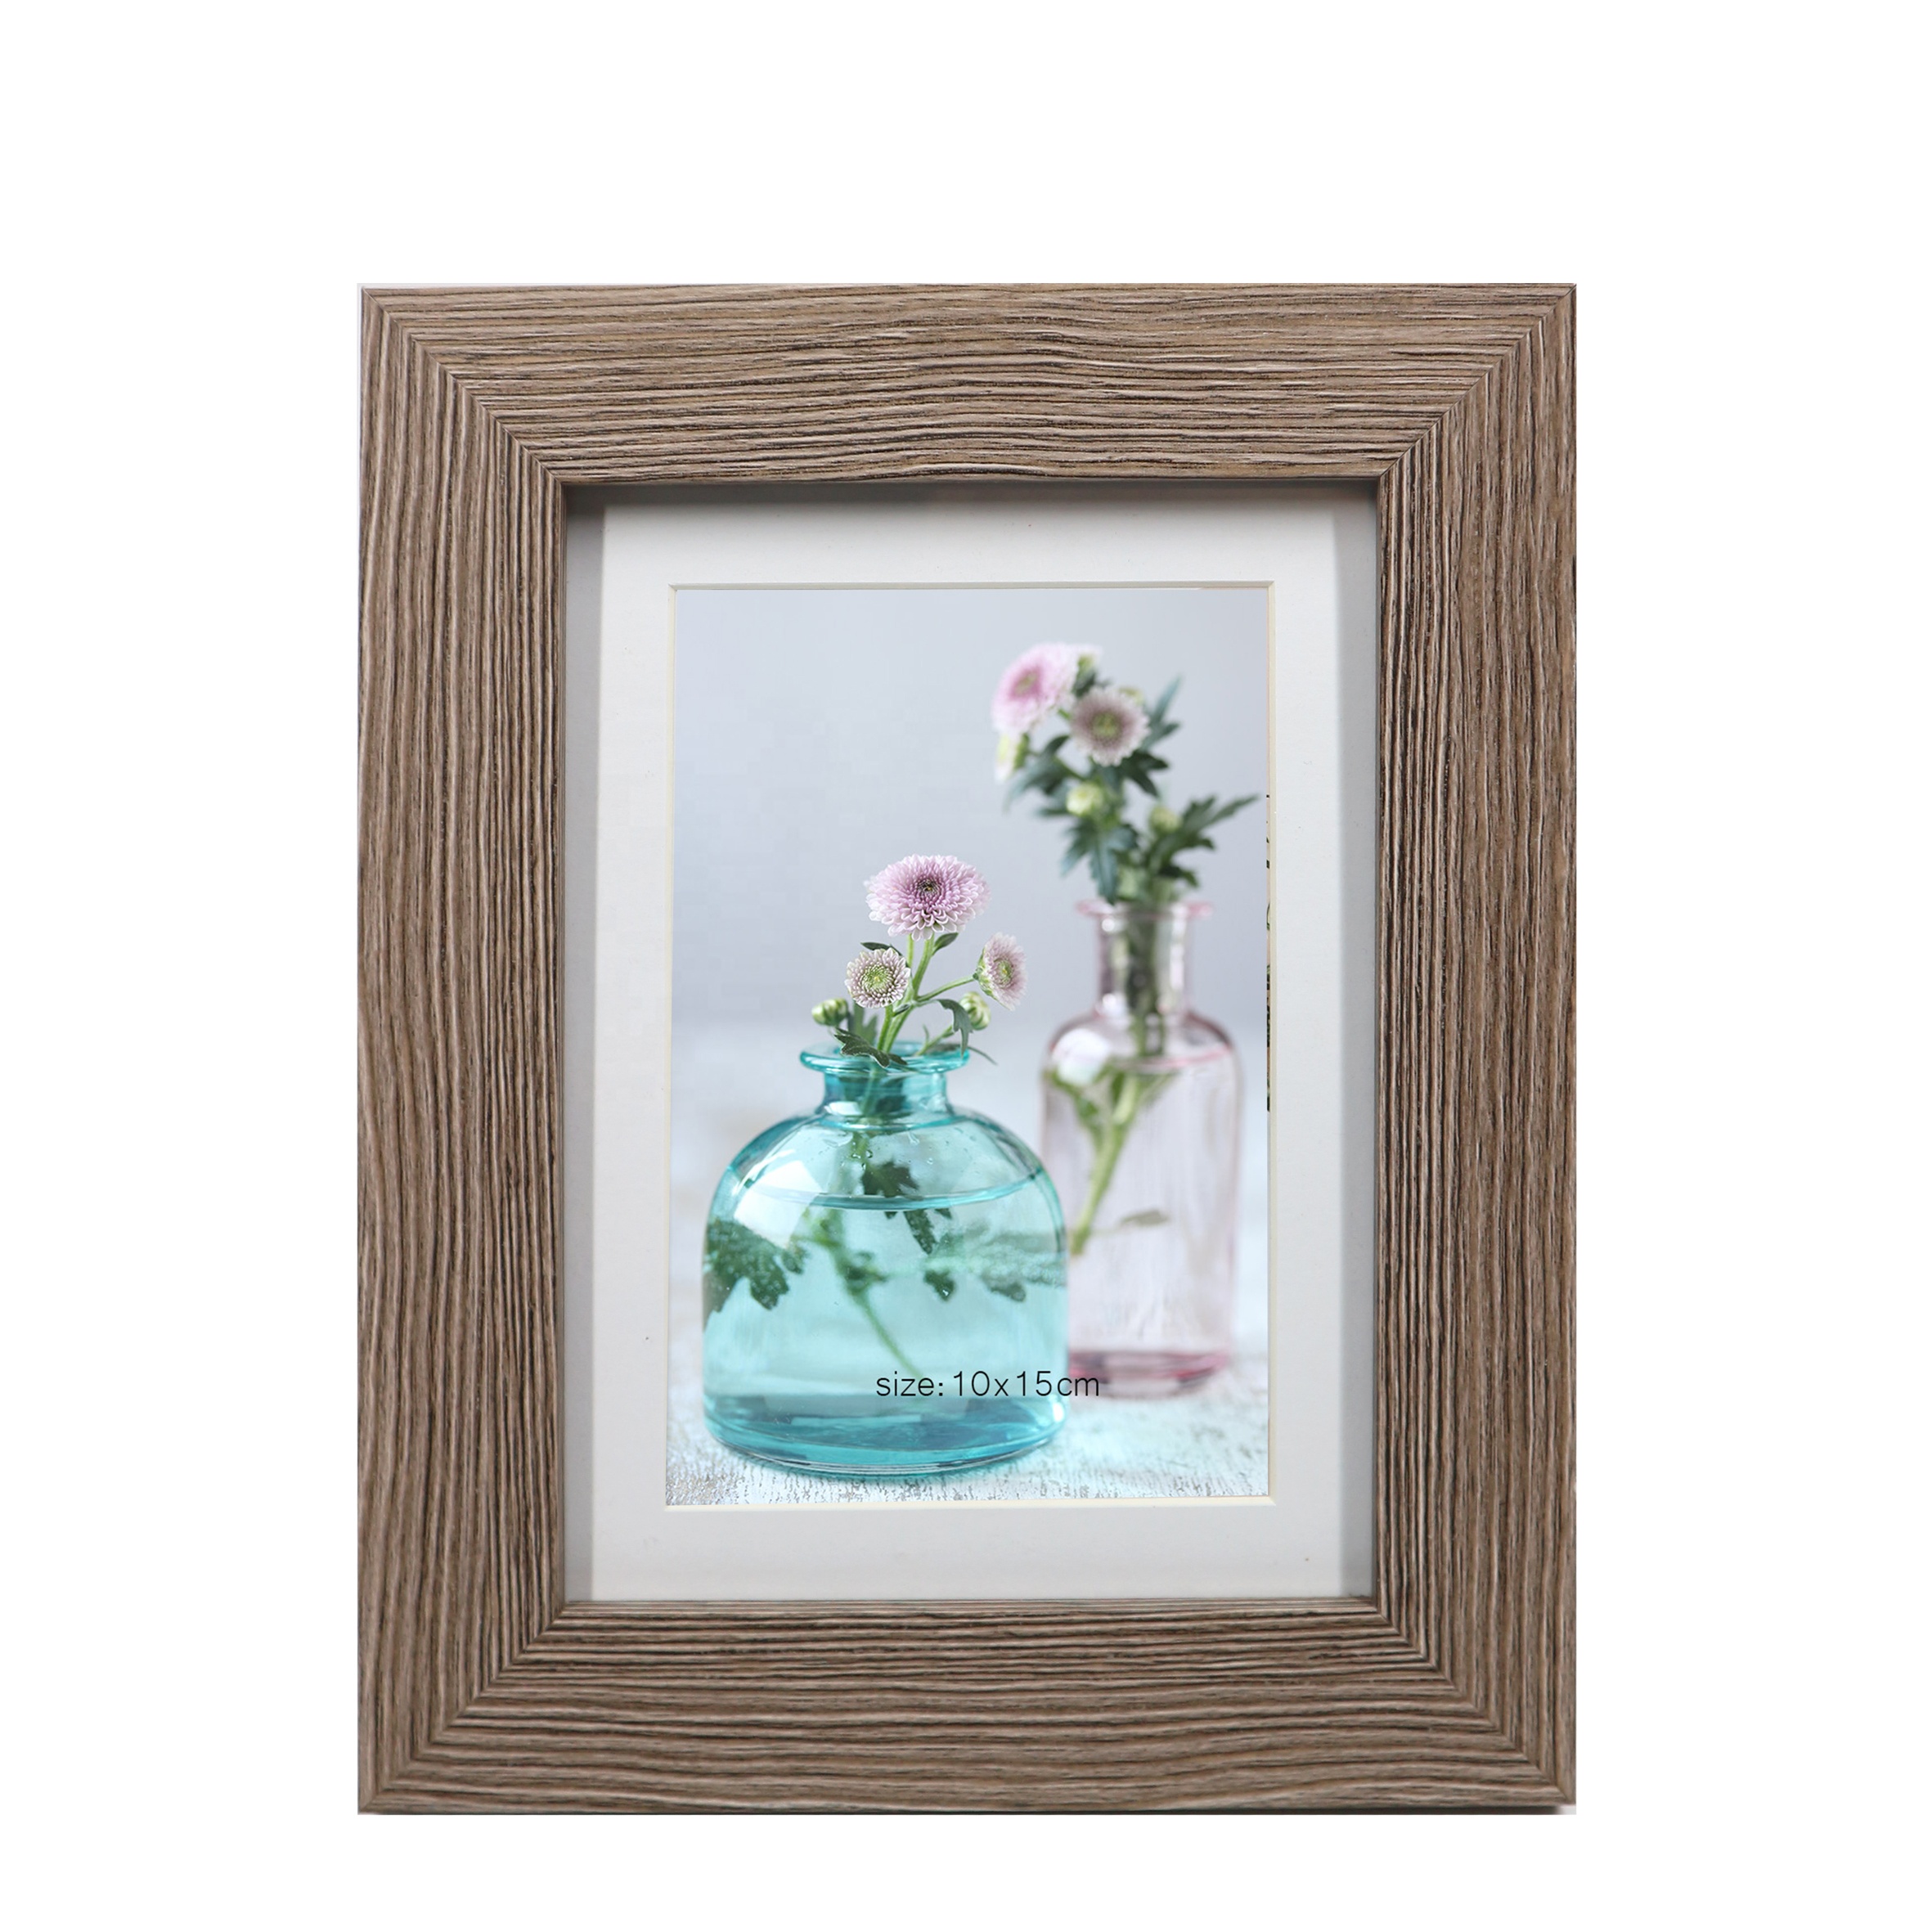 Wooden wholesale photo frame natural color for Home Decor 4x6 inch